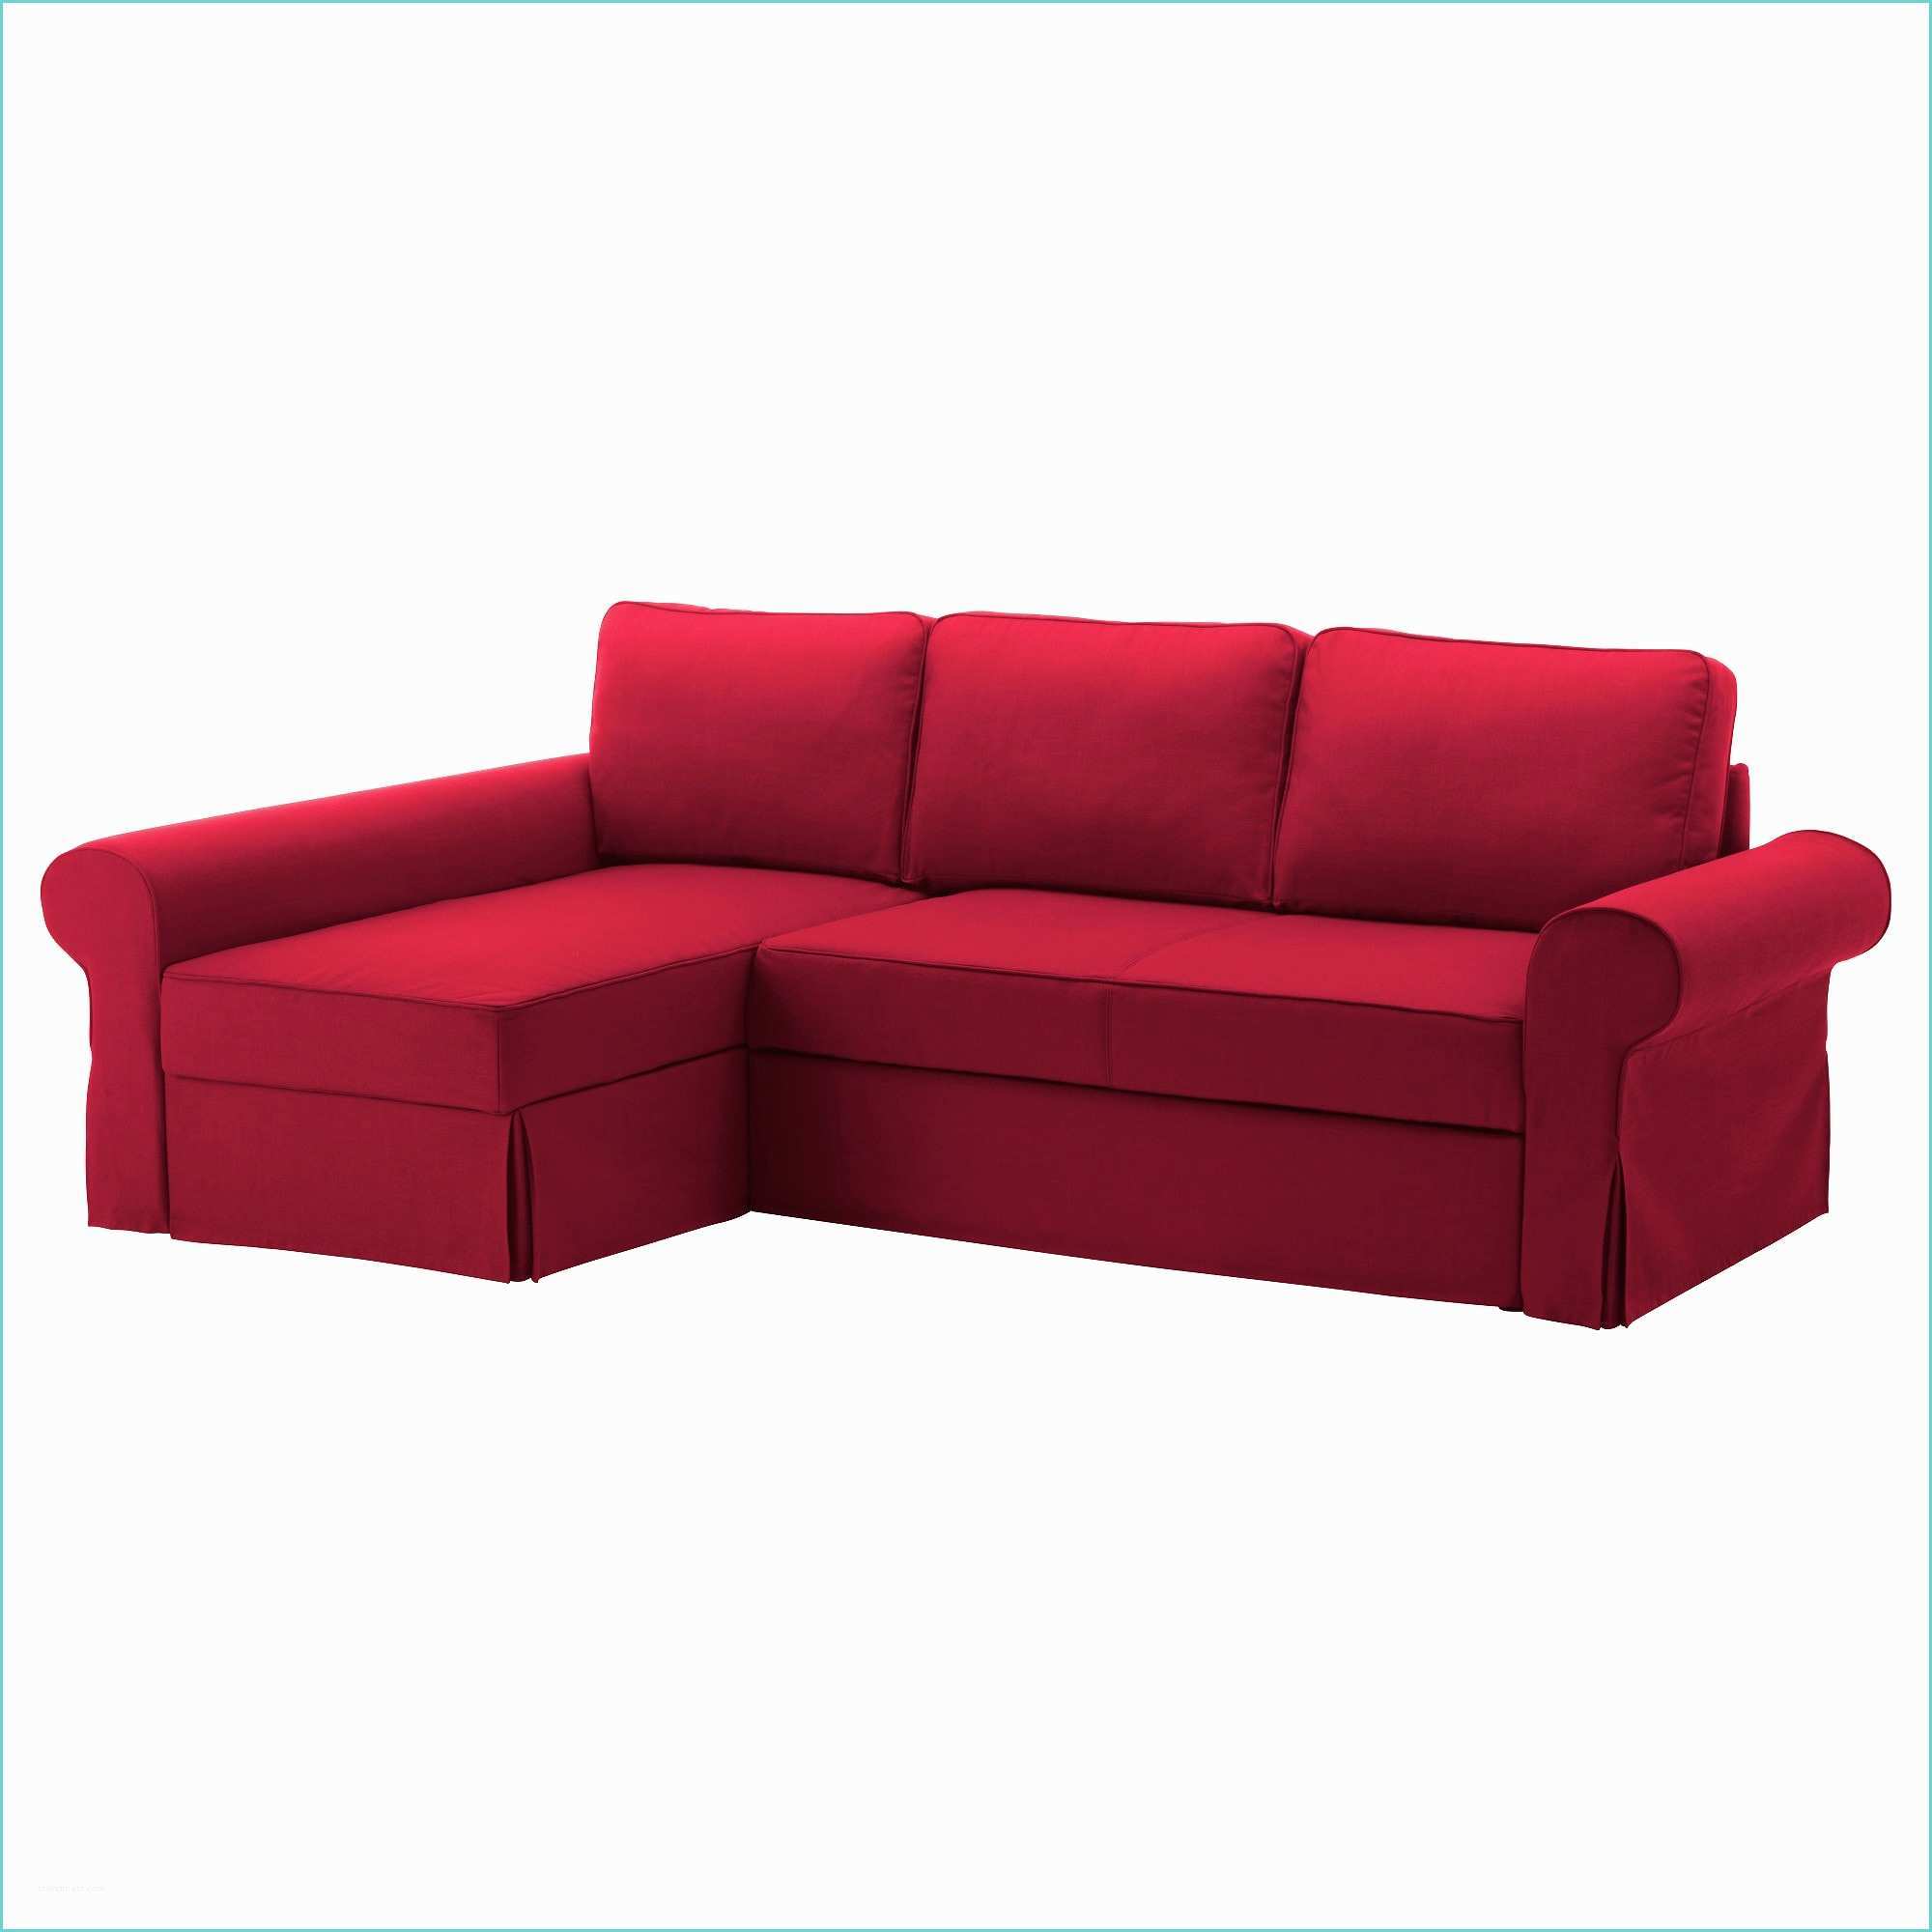 Sofa Beds In Ikea Backabro sofa Bed with Chaise Longue nordvalla Red Ikea